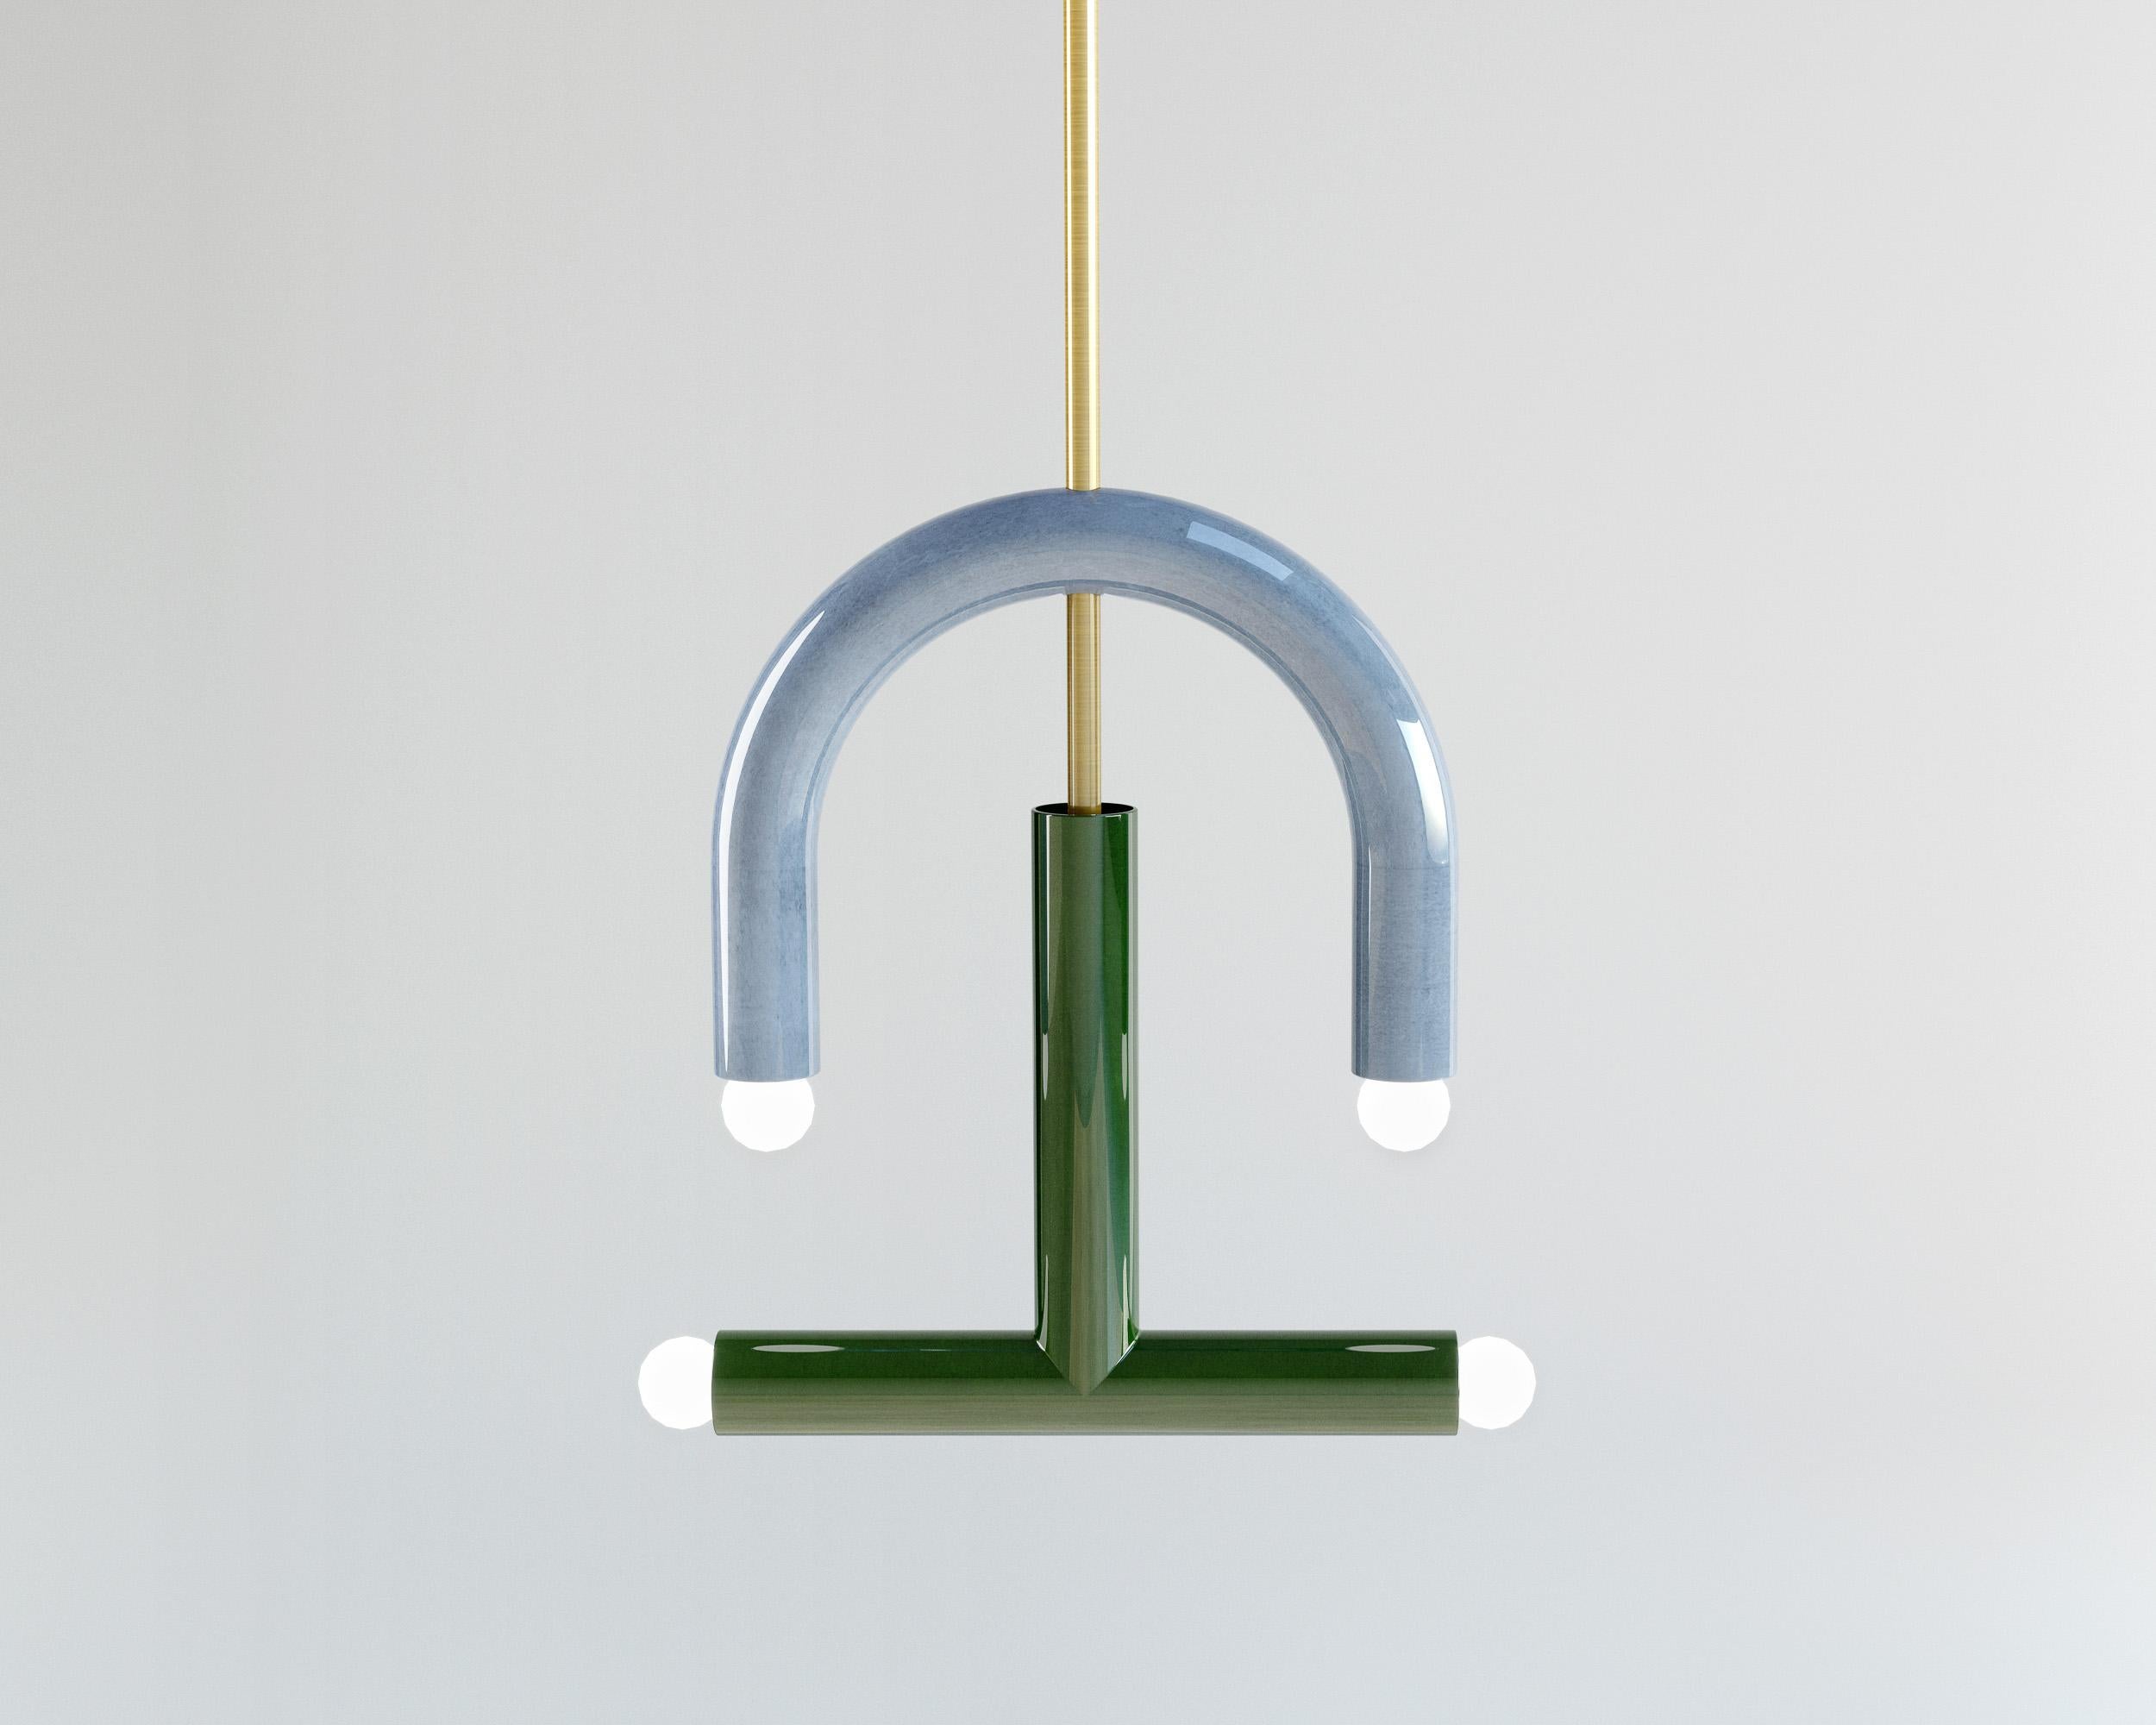 TRN C3 Pendant lamp / ceiling lamp / chandelier 
Designer: Pani Jurek

Dimensions: H 45 x 35 x 5 cm
Model shown: Blue & green 

Bulb (not included): E27/E26, compatible with US electric system

Materials: Hand glazed ceramic and brass
Rod: brass,